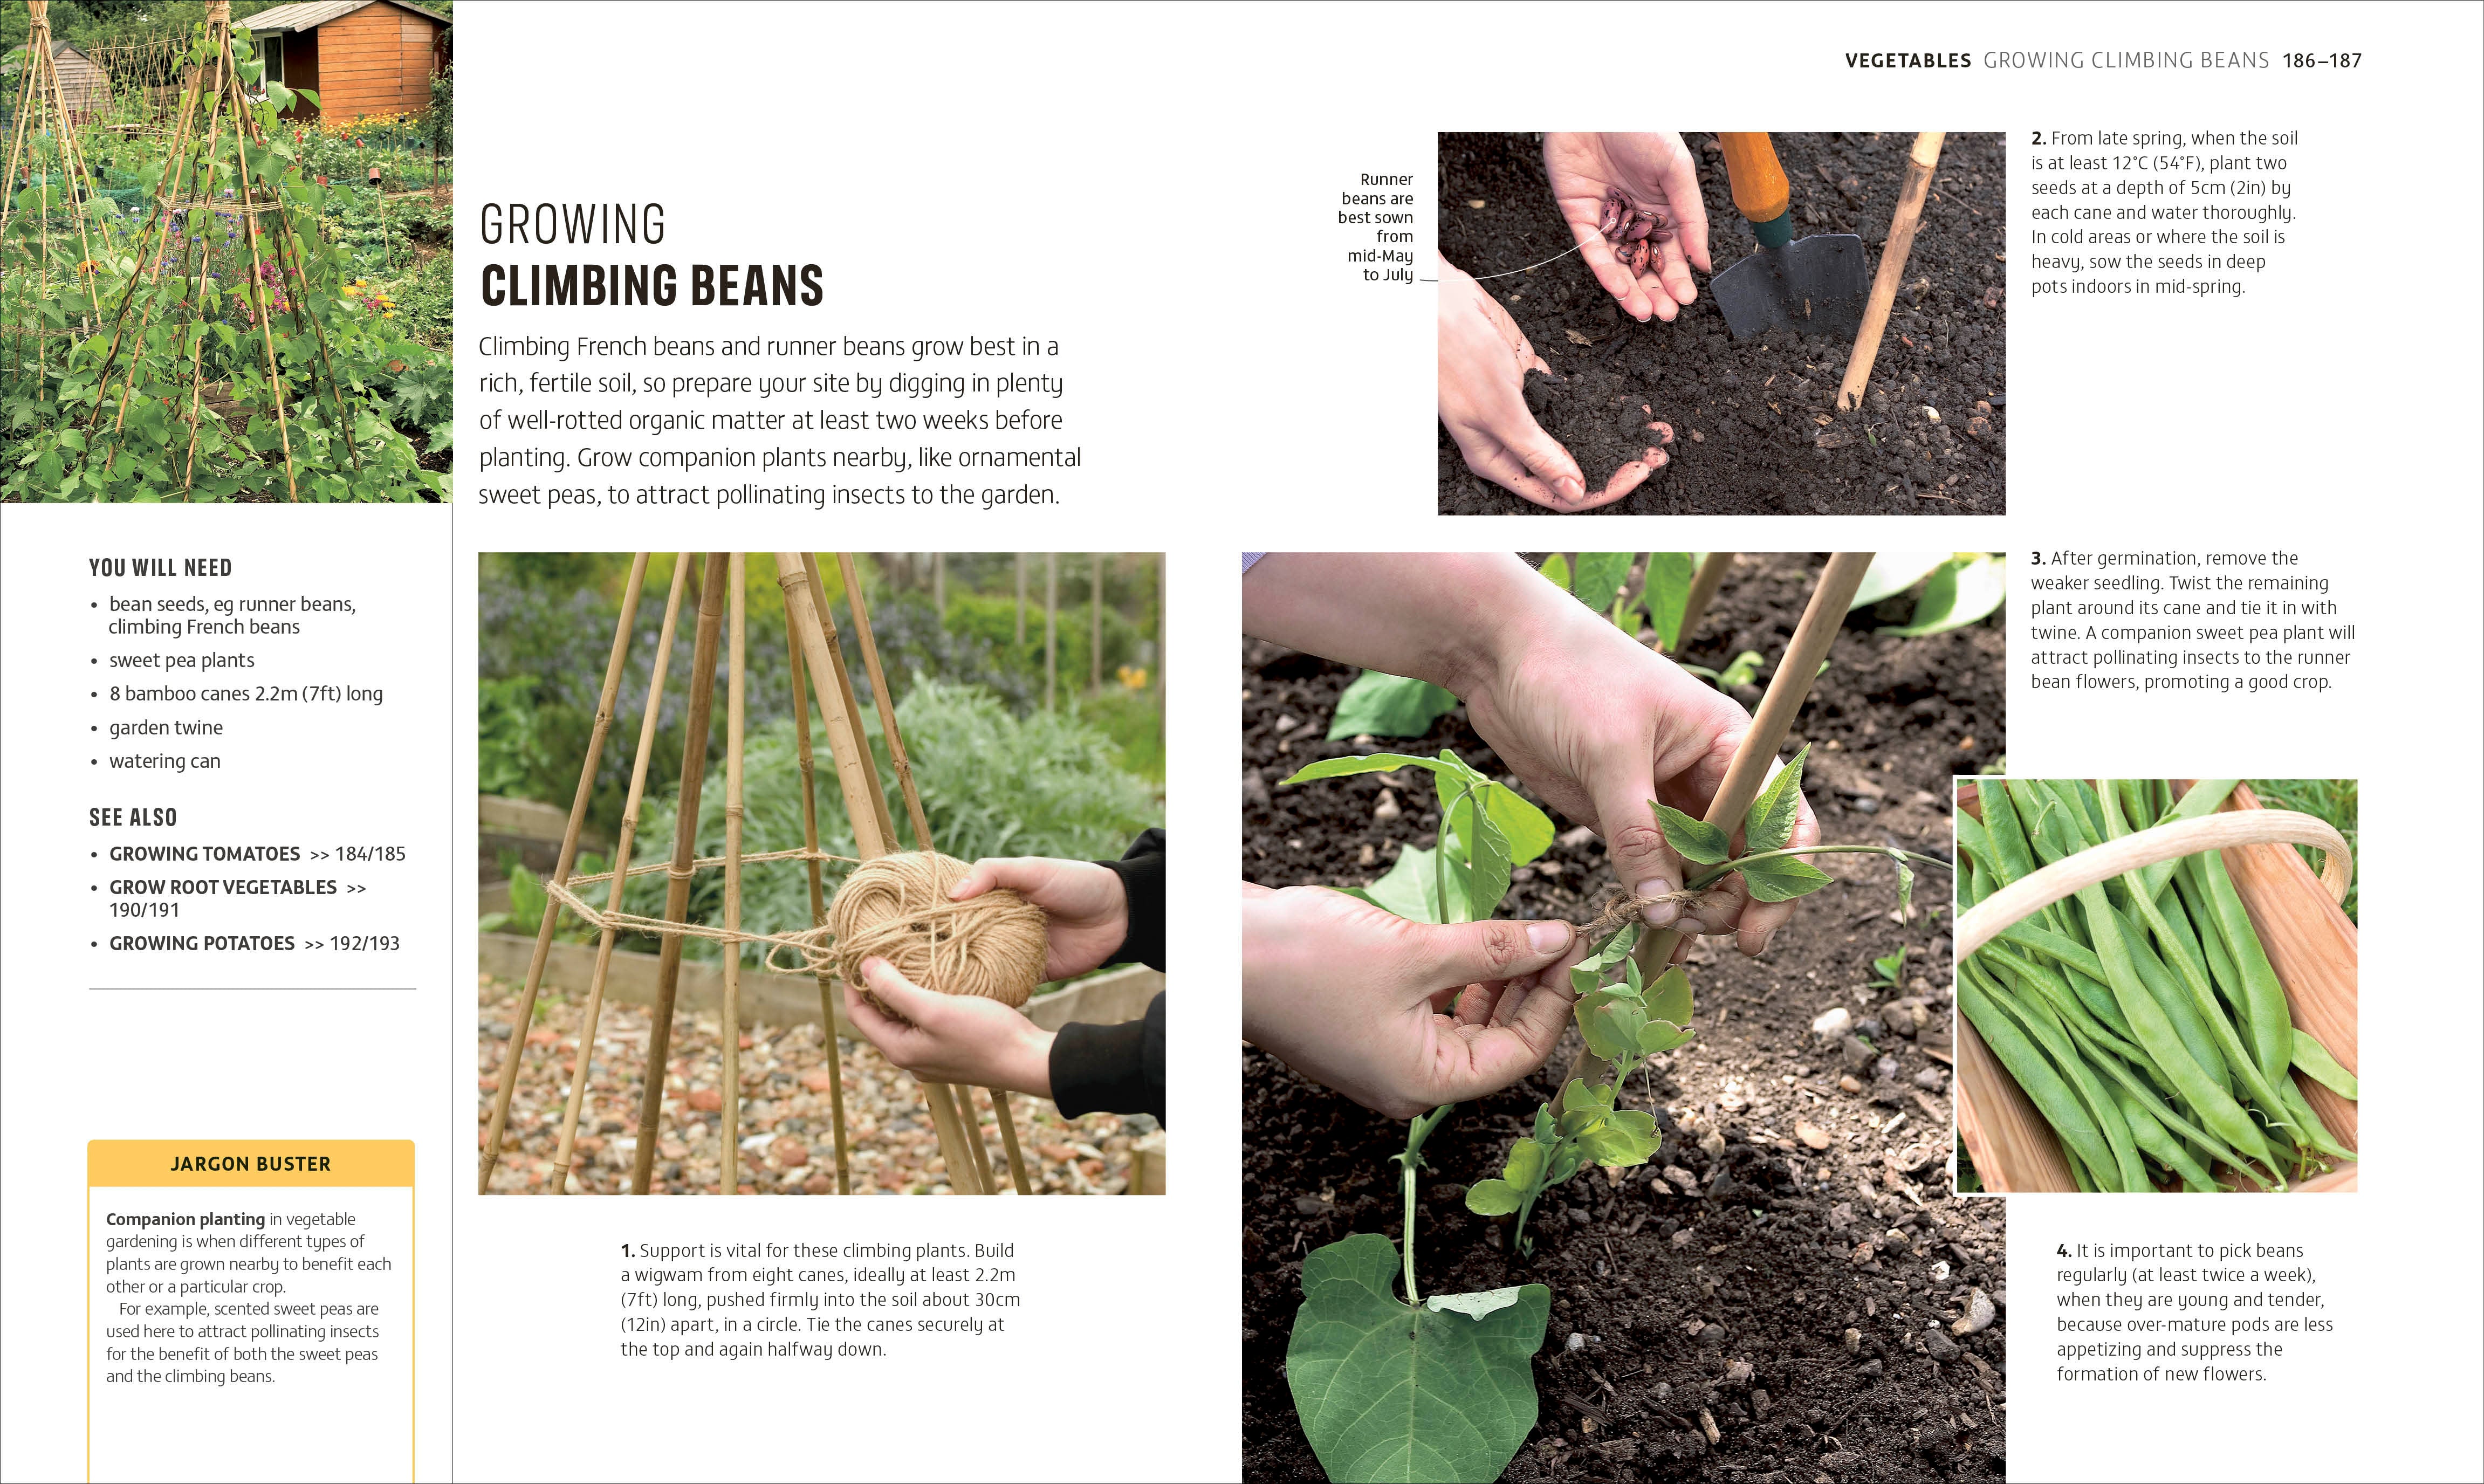 How To Garden When You're New To Gardening (RHS)| Book - Lifestory